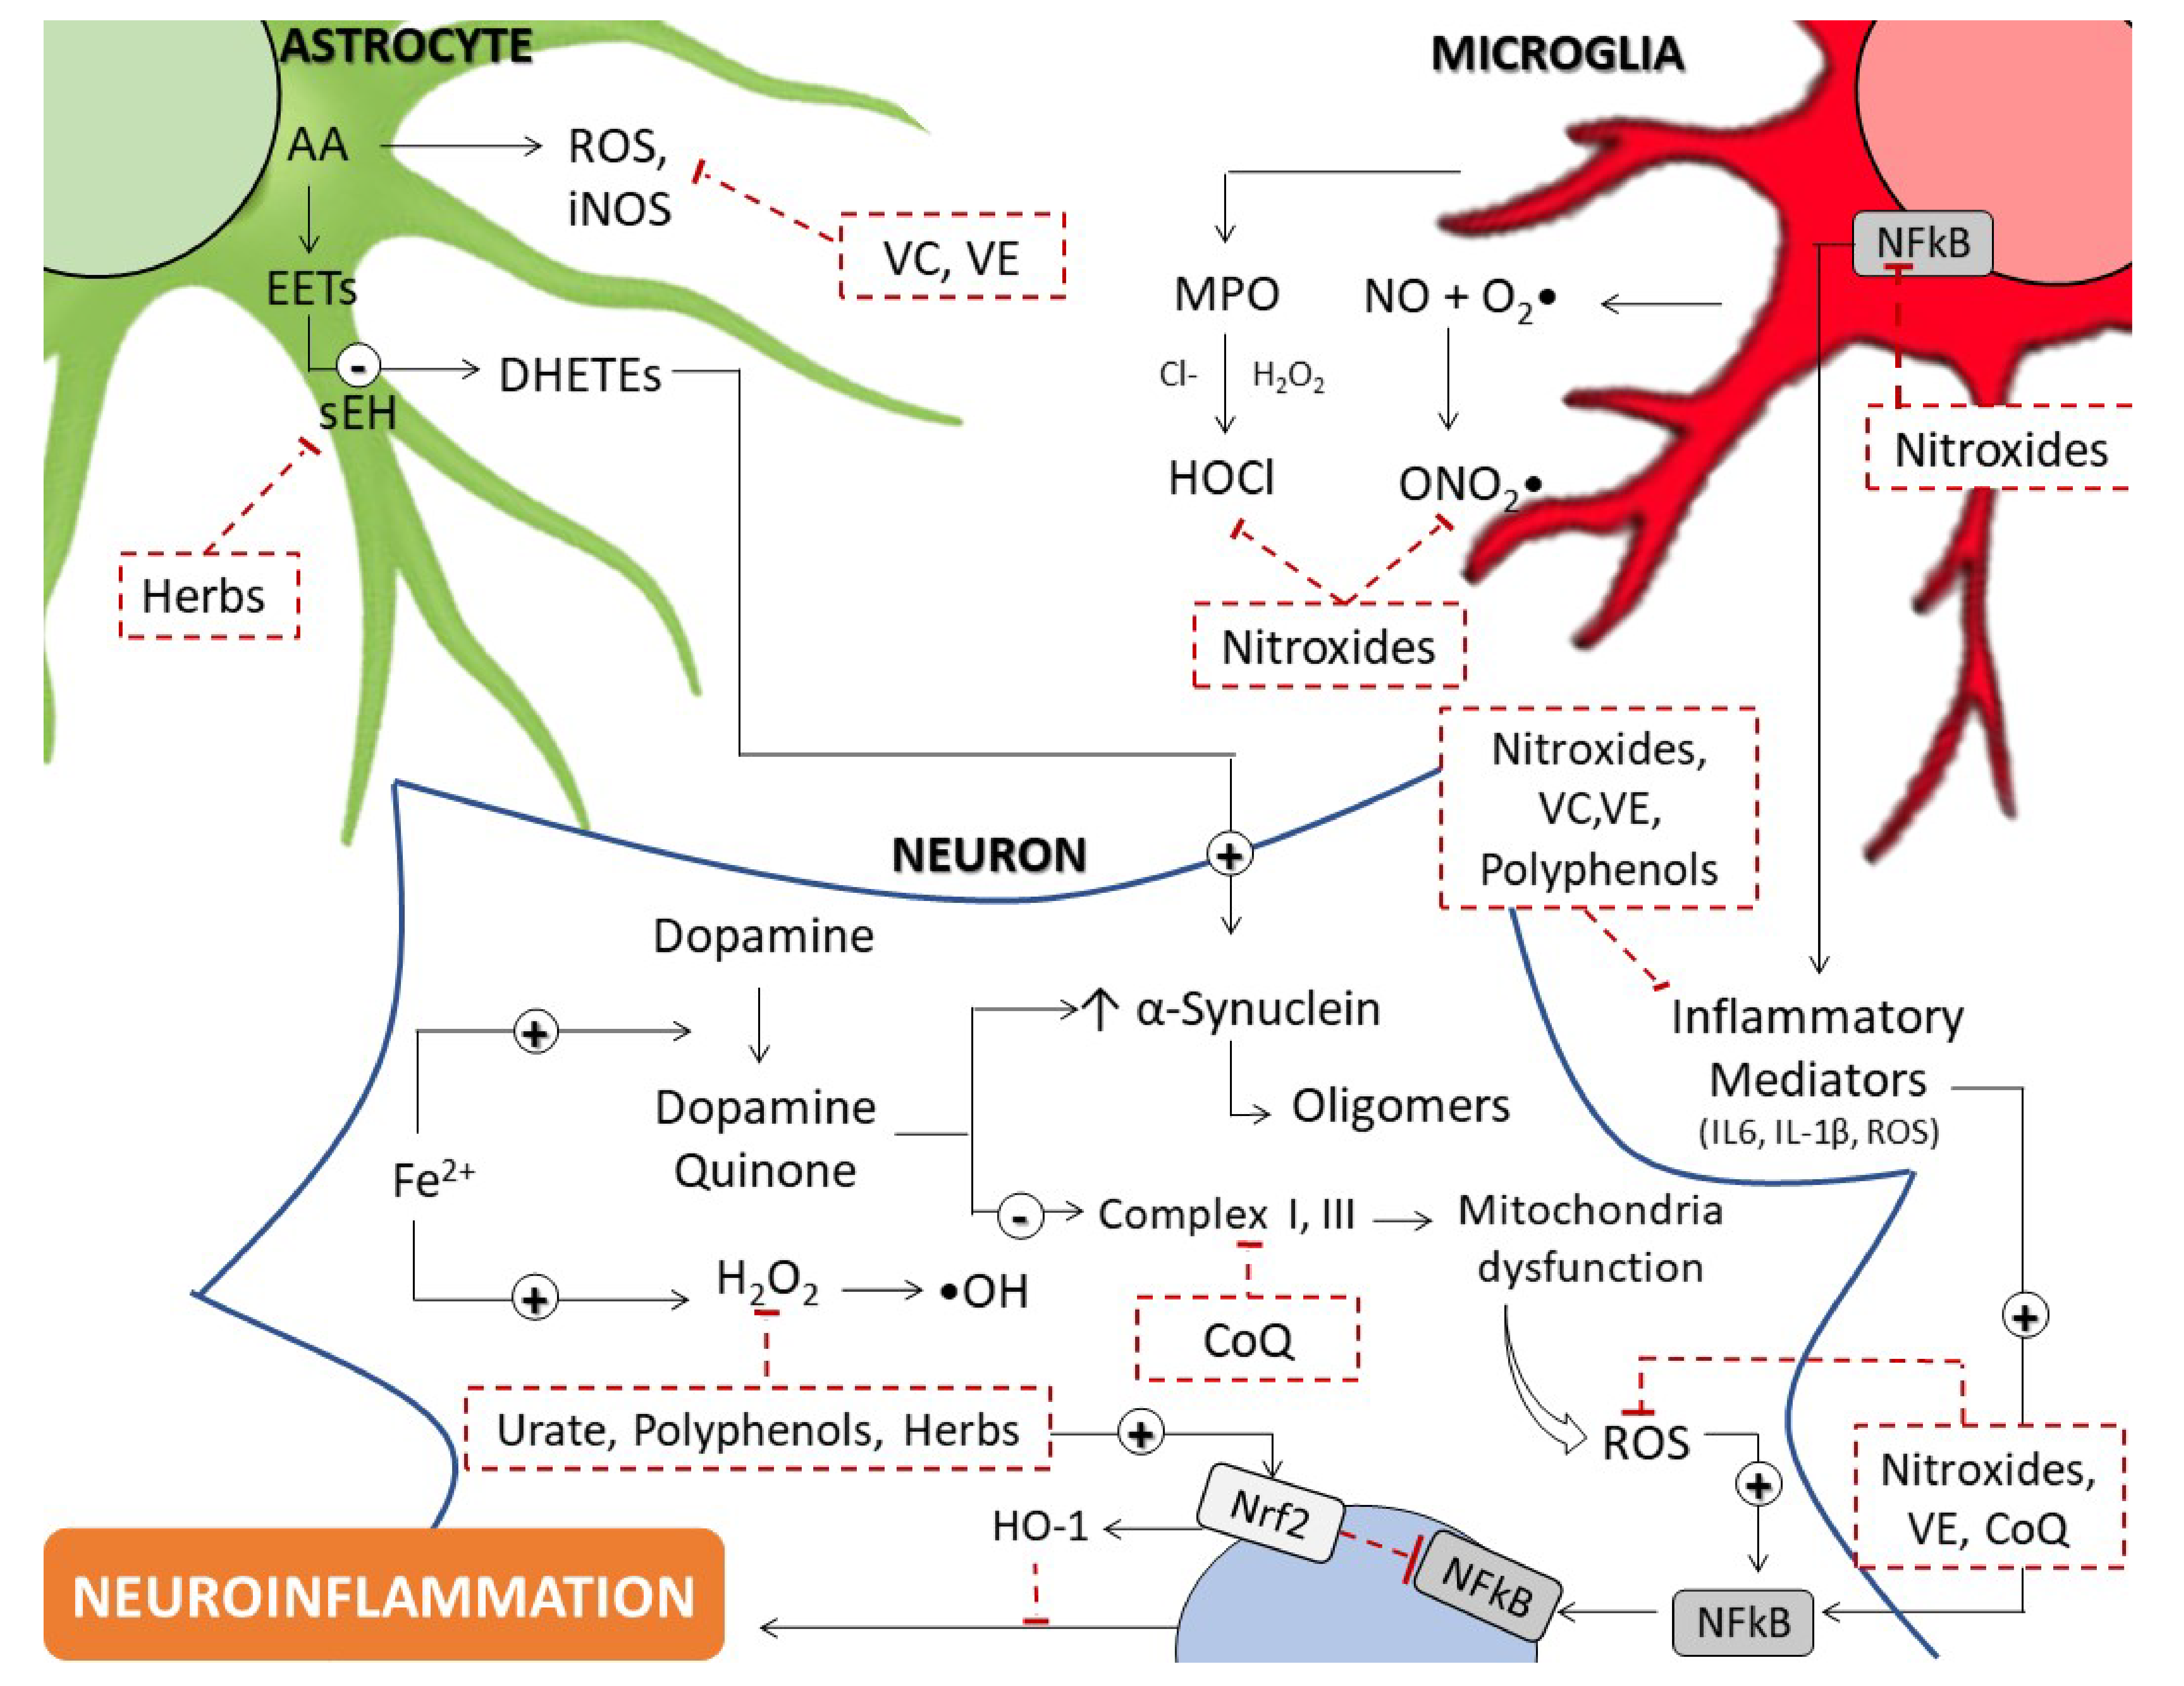 MitoQ and Reduced Glutathione Protects Against Dopamine Induced Brain  Mitochondrial Electron Transport Chain Inhibition During Extended In Vitro  Incubation: Involvement of Free Radicals and Quinone Products - MDS  Abstracts